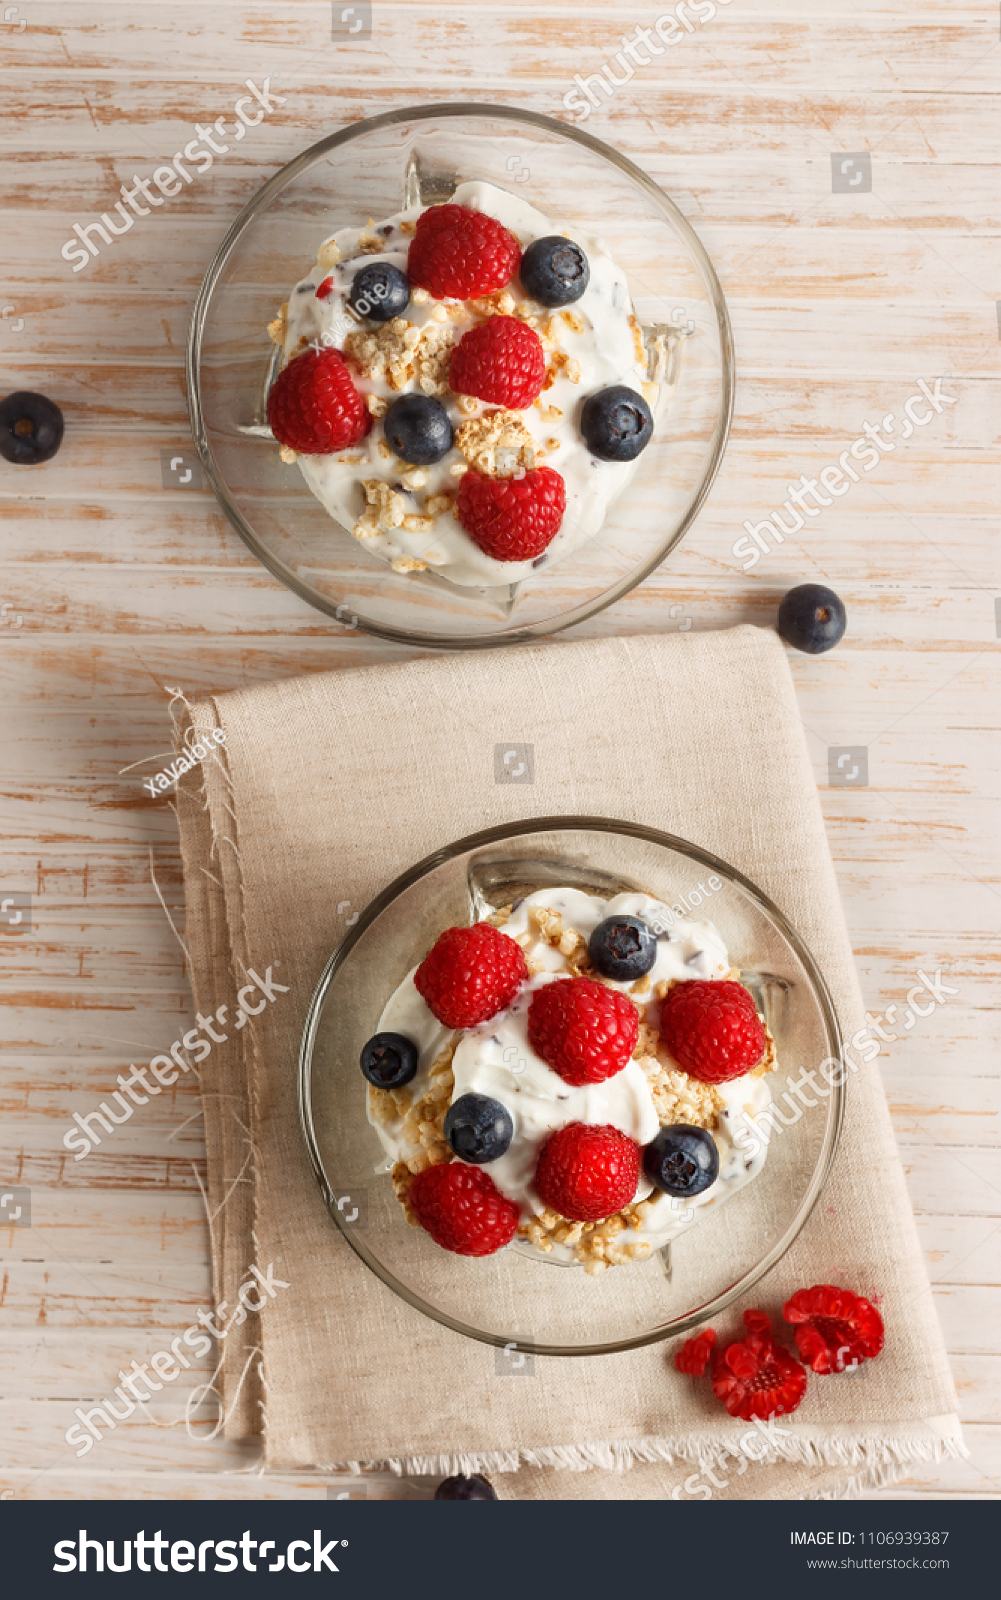 Raspberries, blueberries, cereals and yogurt in a glass bowl on sackcloth and wooden slats. Healthy breakfast for a healthy life. Vertical image view from above. #1106939387